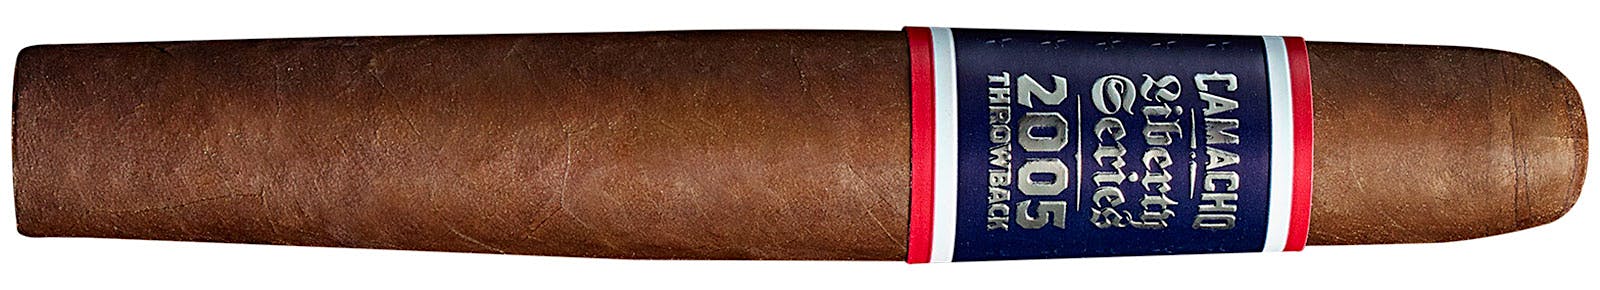 Camacho Liberty 2005 Throwback is a double-tapered figurado called 11/18.